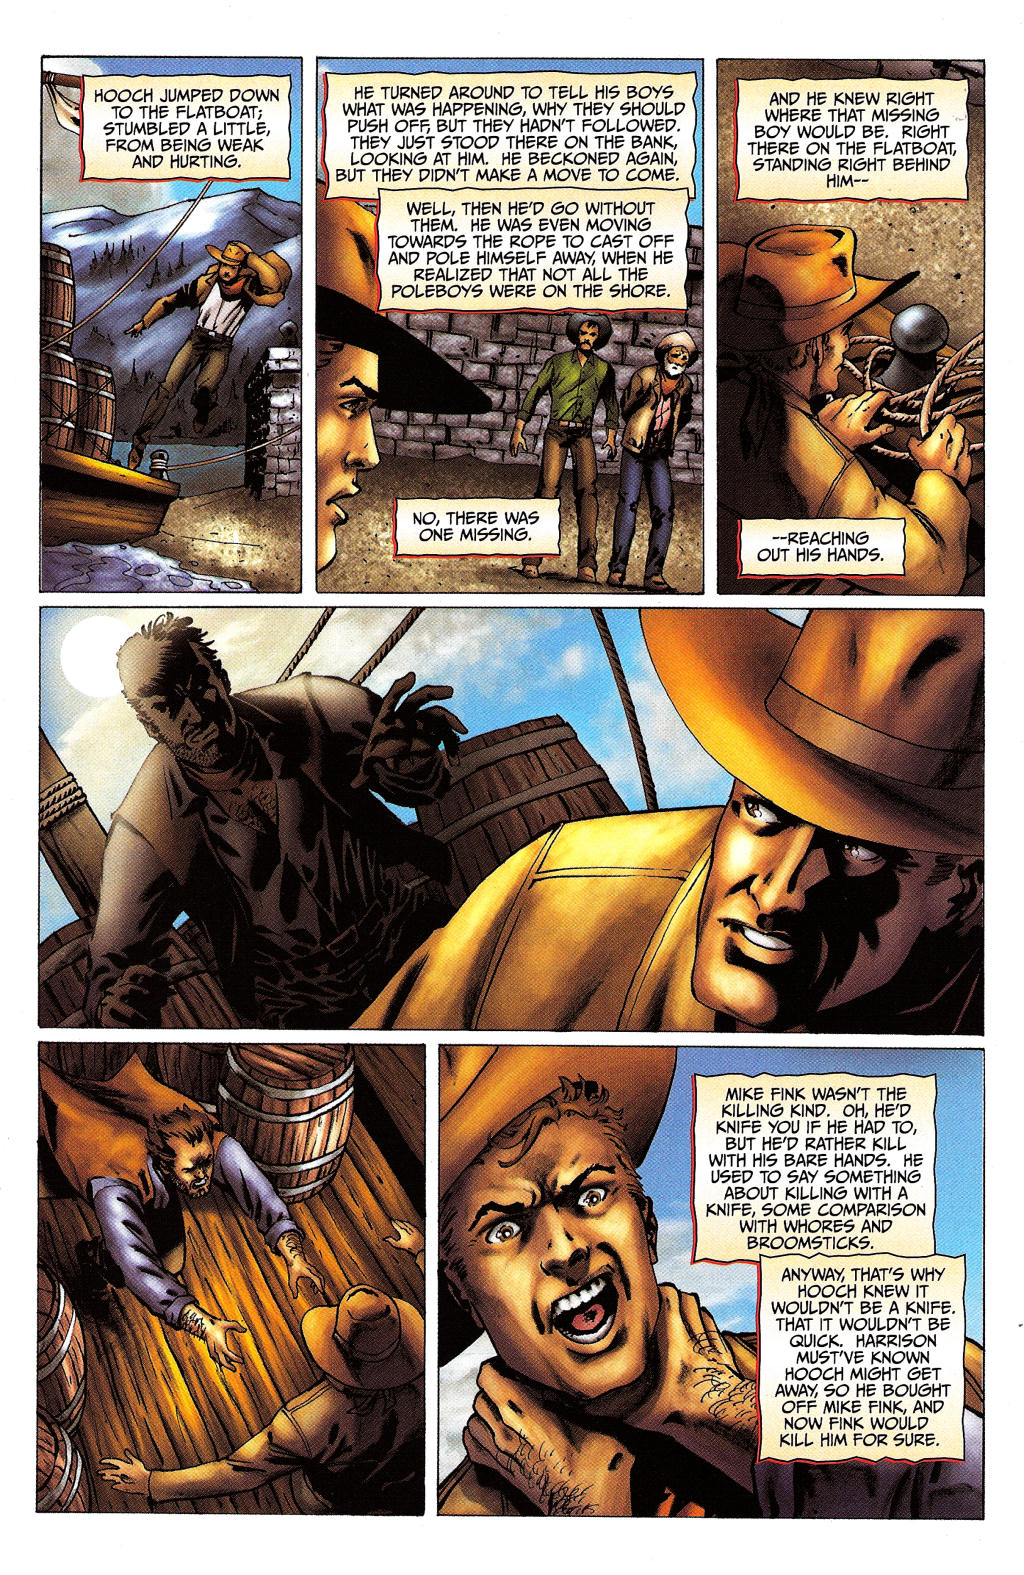 Red Prophet: The Tales of Alvin Maker issue 4 - Page 21